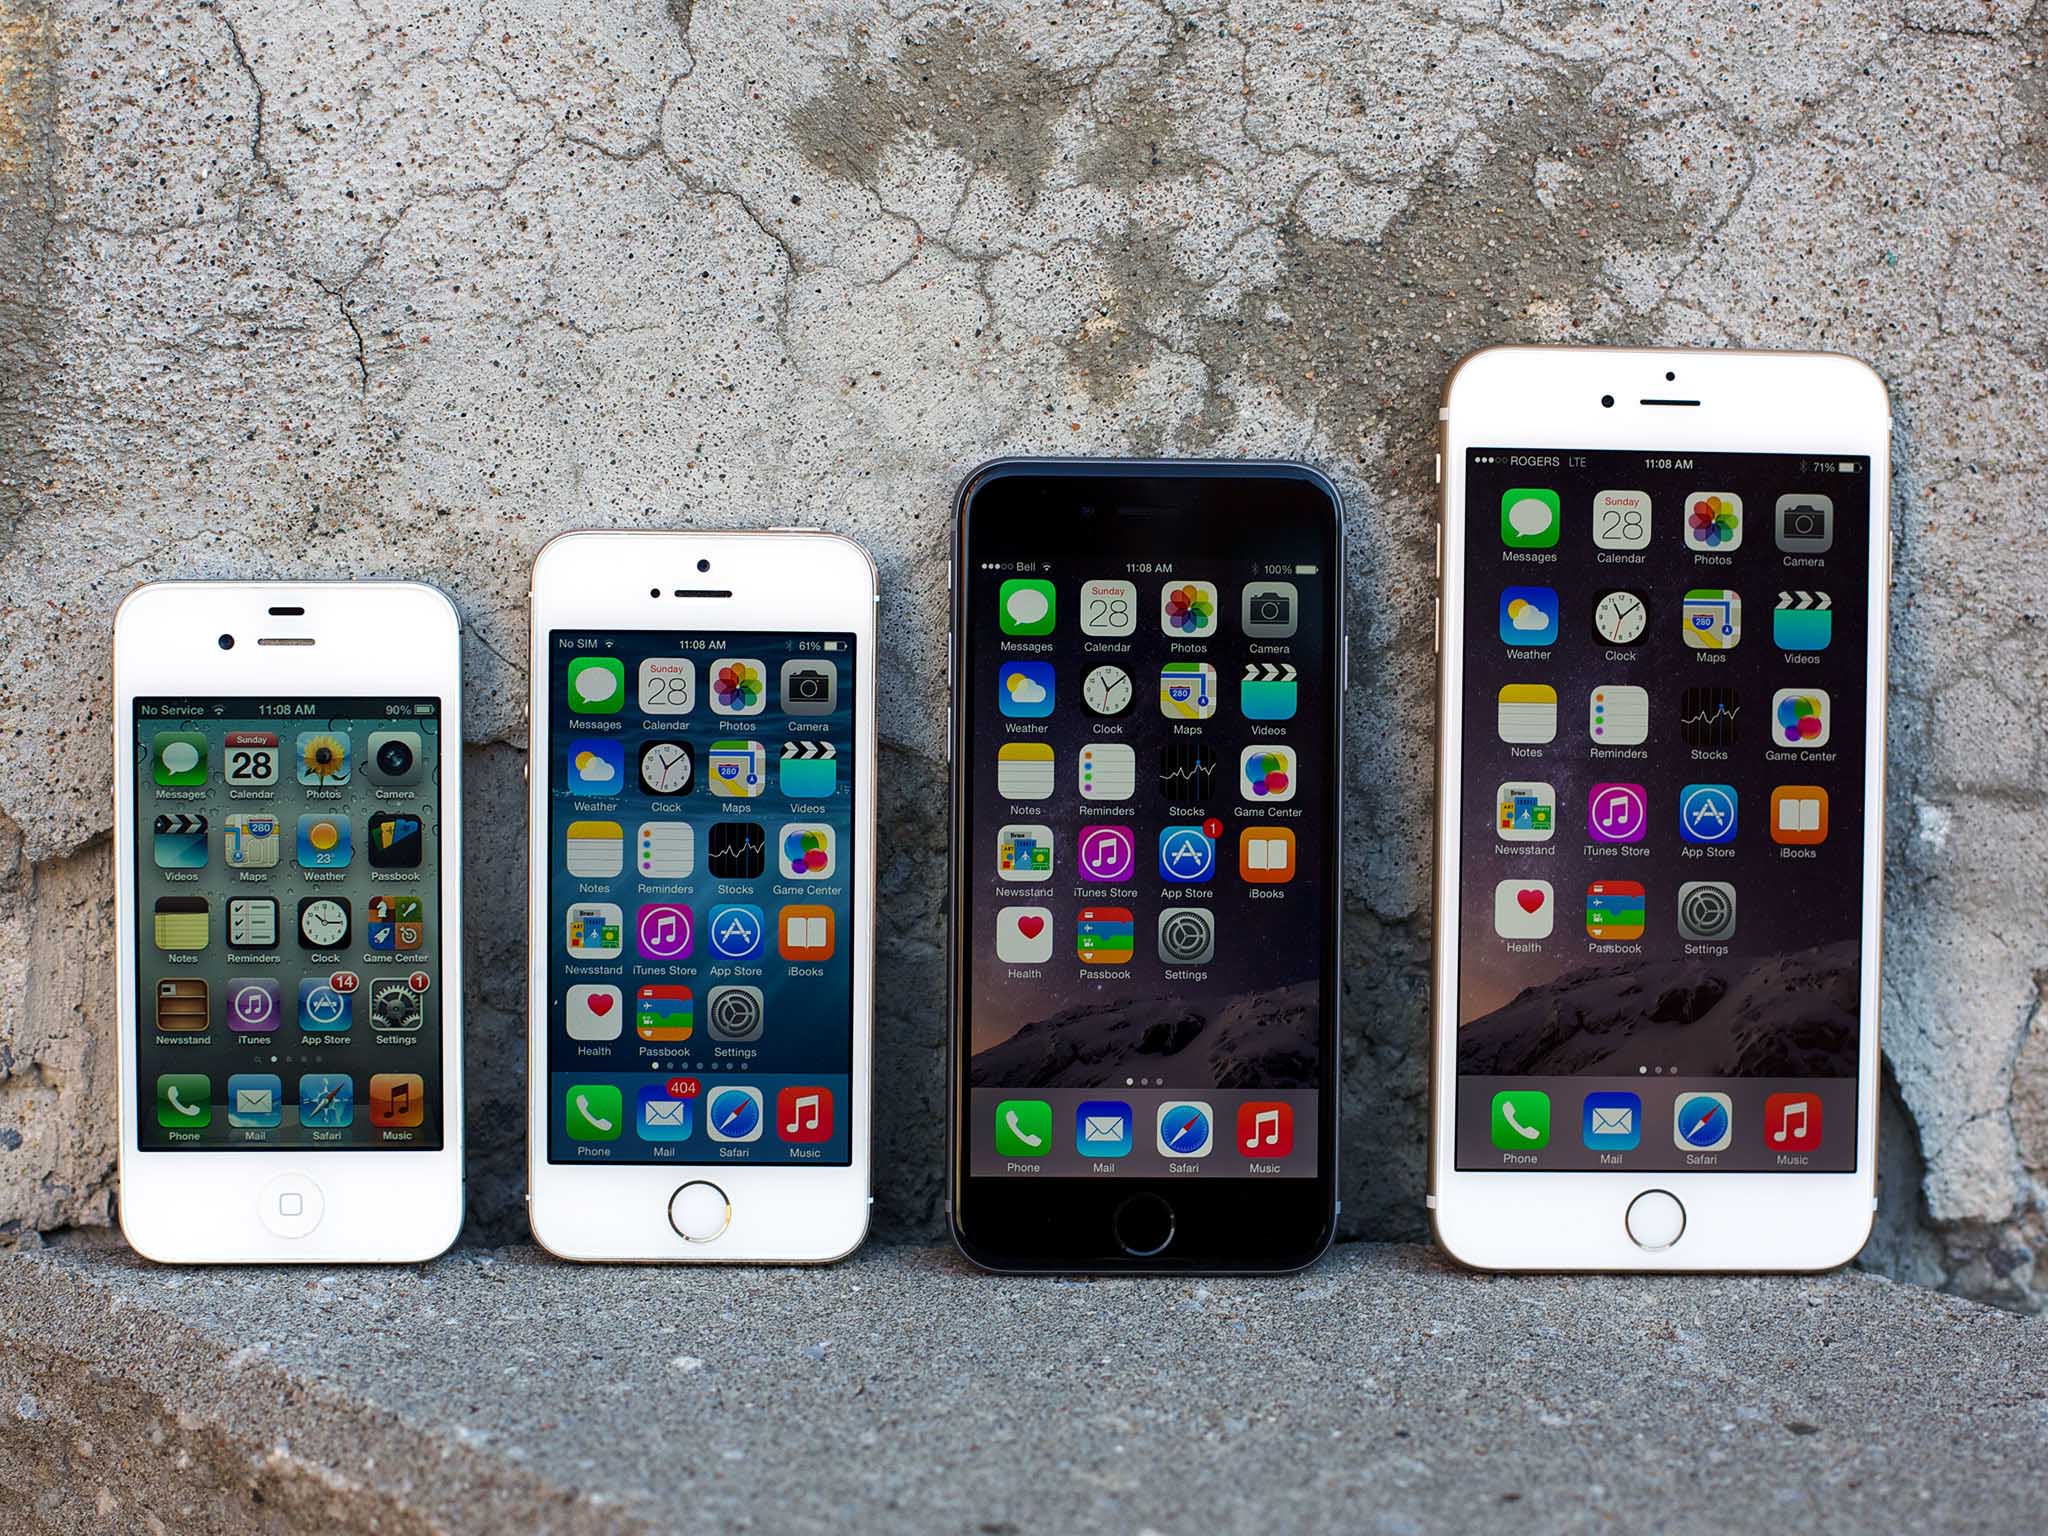 iPhone 4s, 5s, and 6